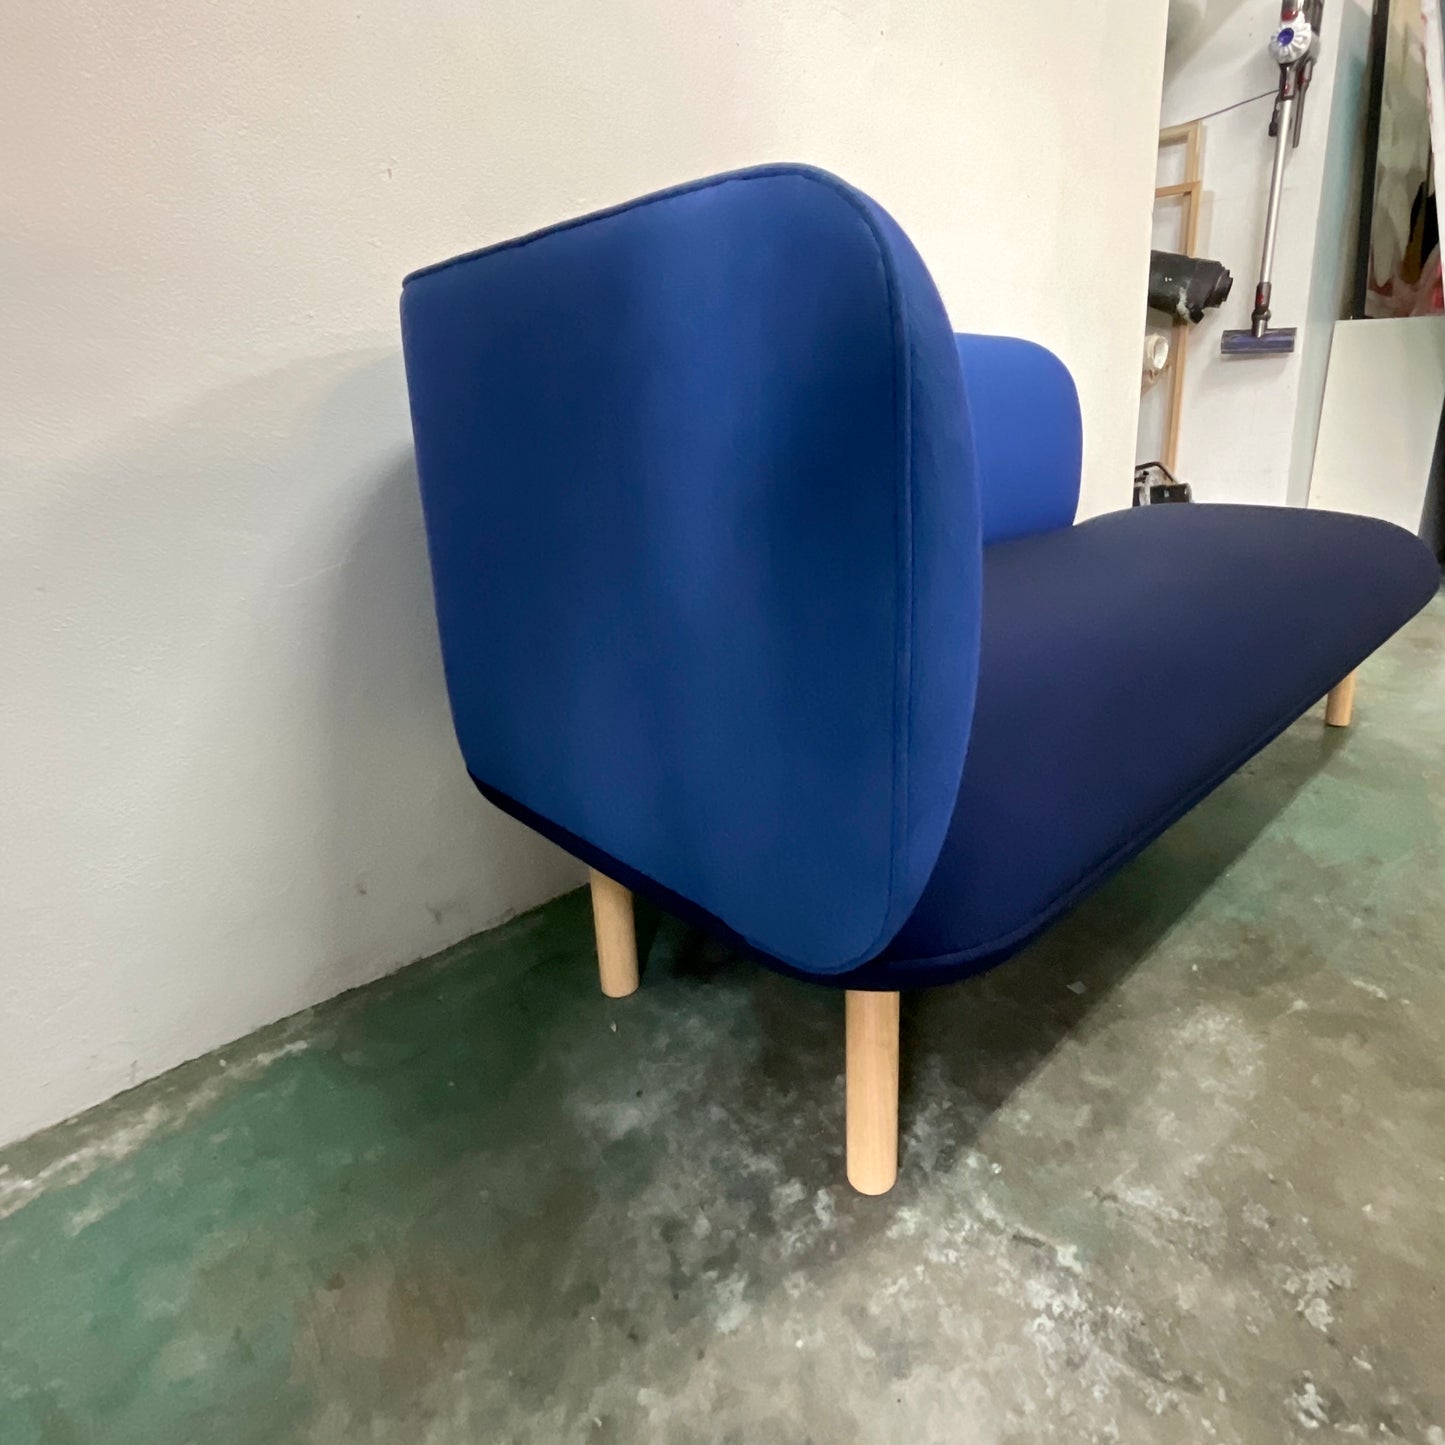 Wes Chaise with Single Arm by Tom Fereday for Swiss Design